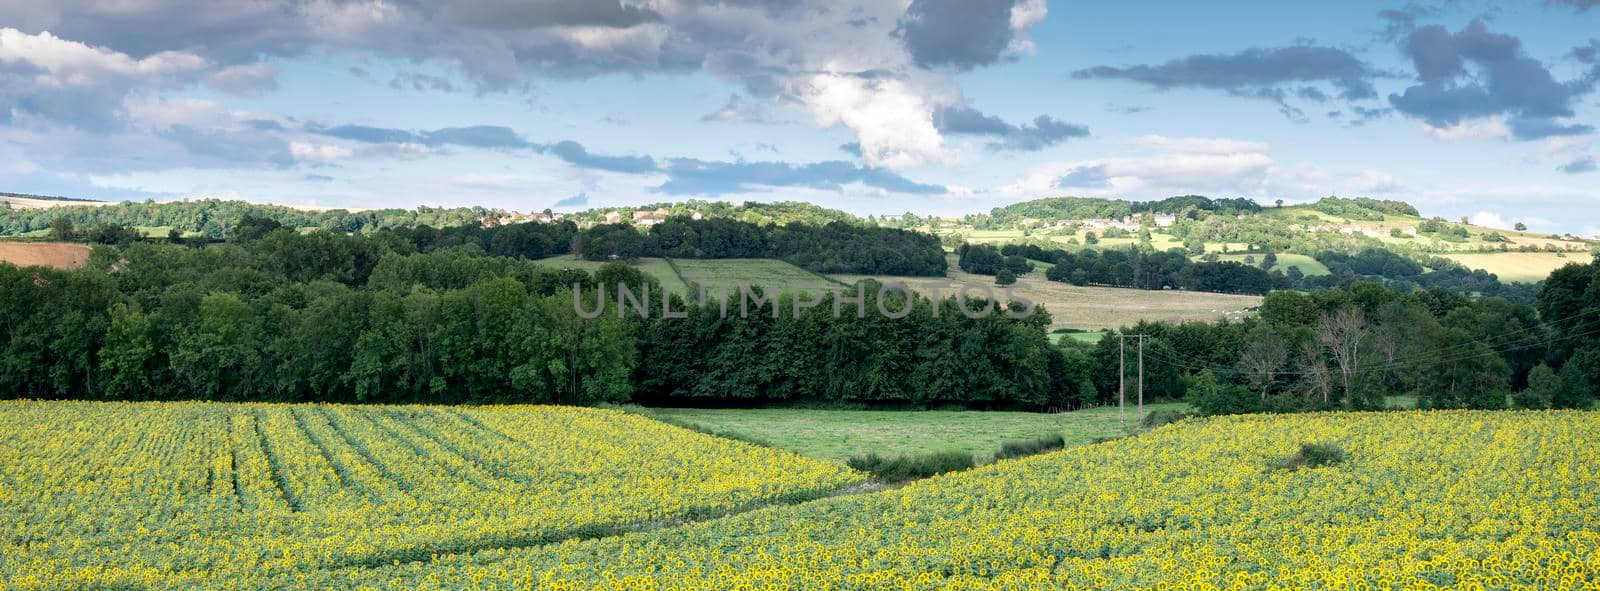 landscape in french morvan with sunflowers under blue sky with clouds by ahavelaar